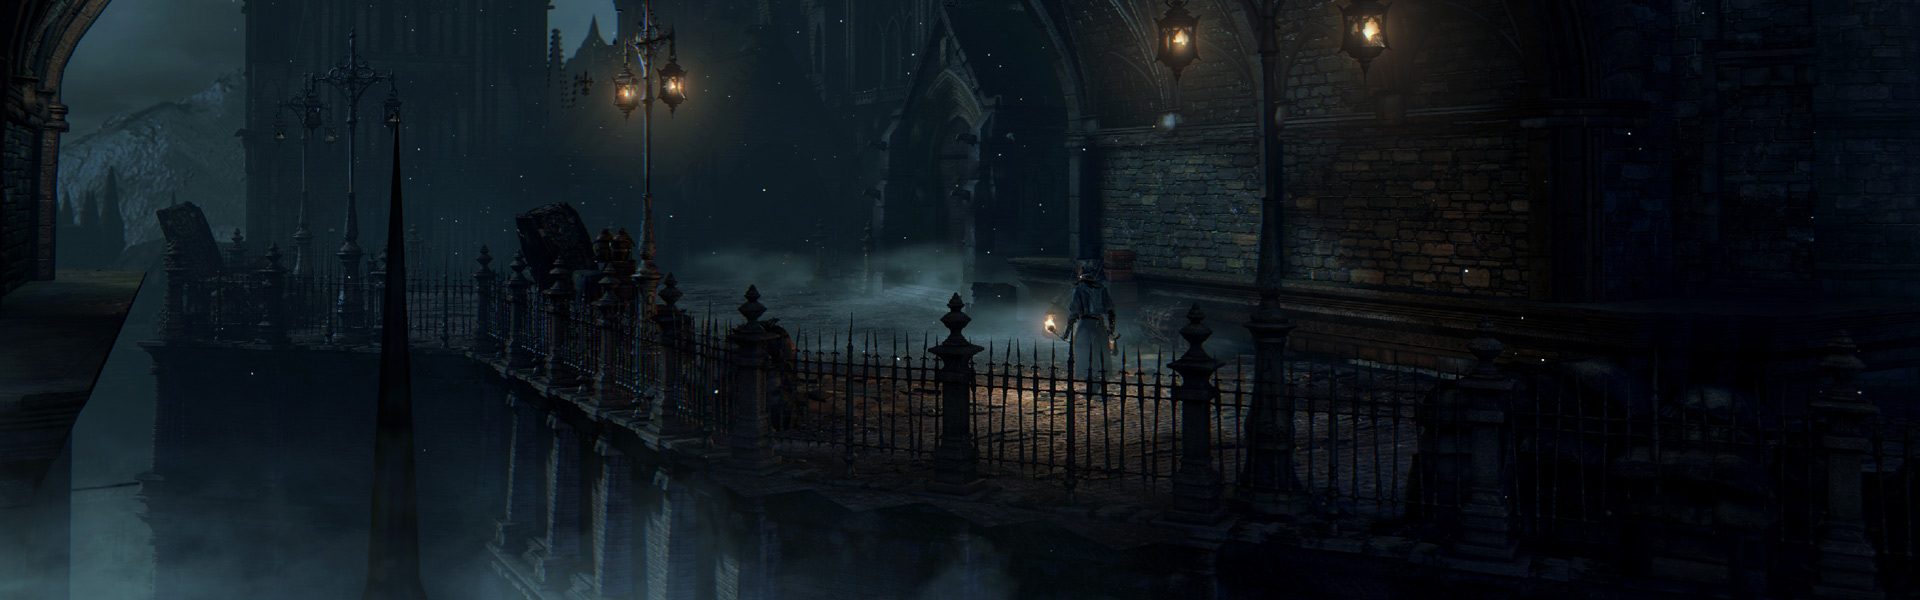 New video showcases the otherworldly music of Bloodborne - PlayStation.Blog